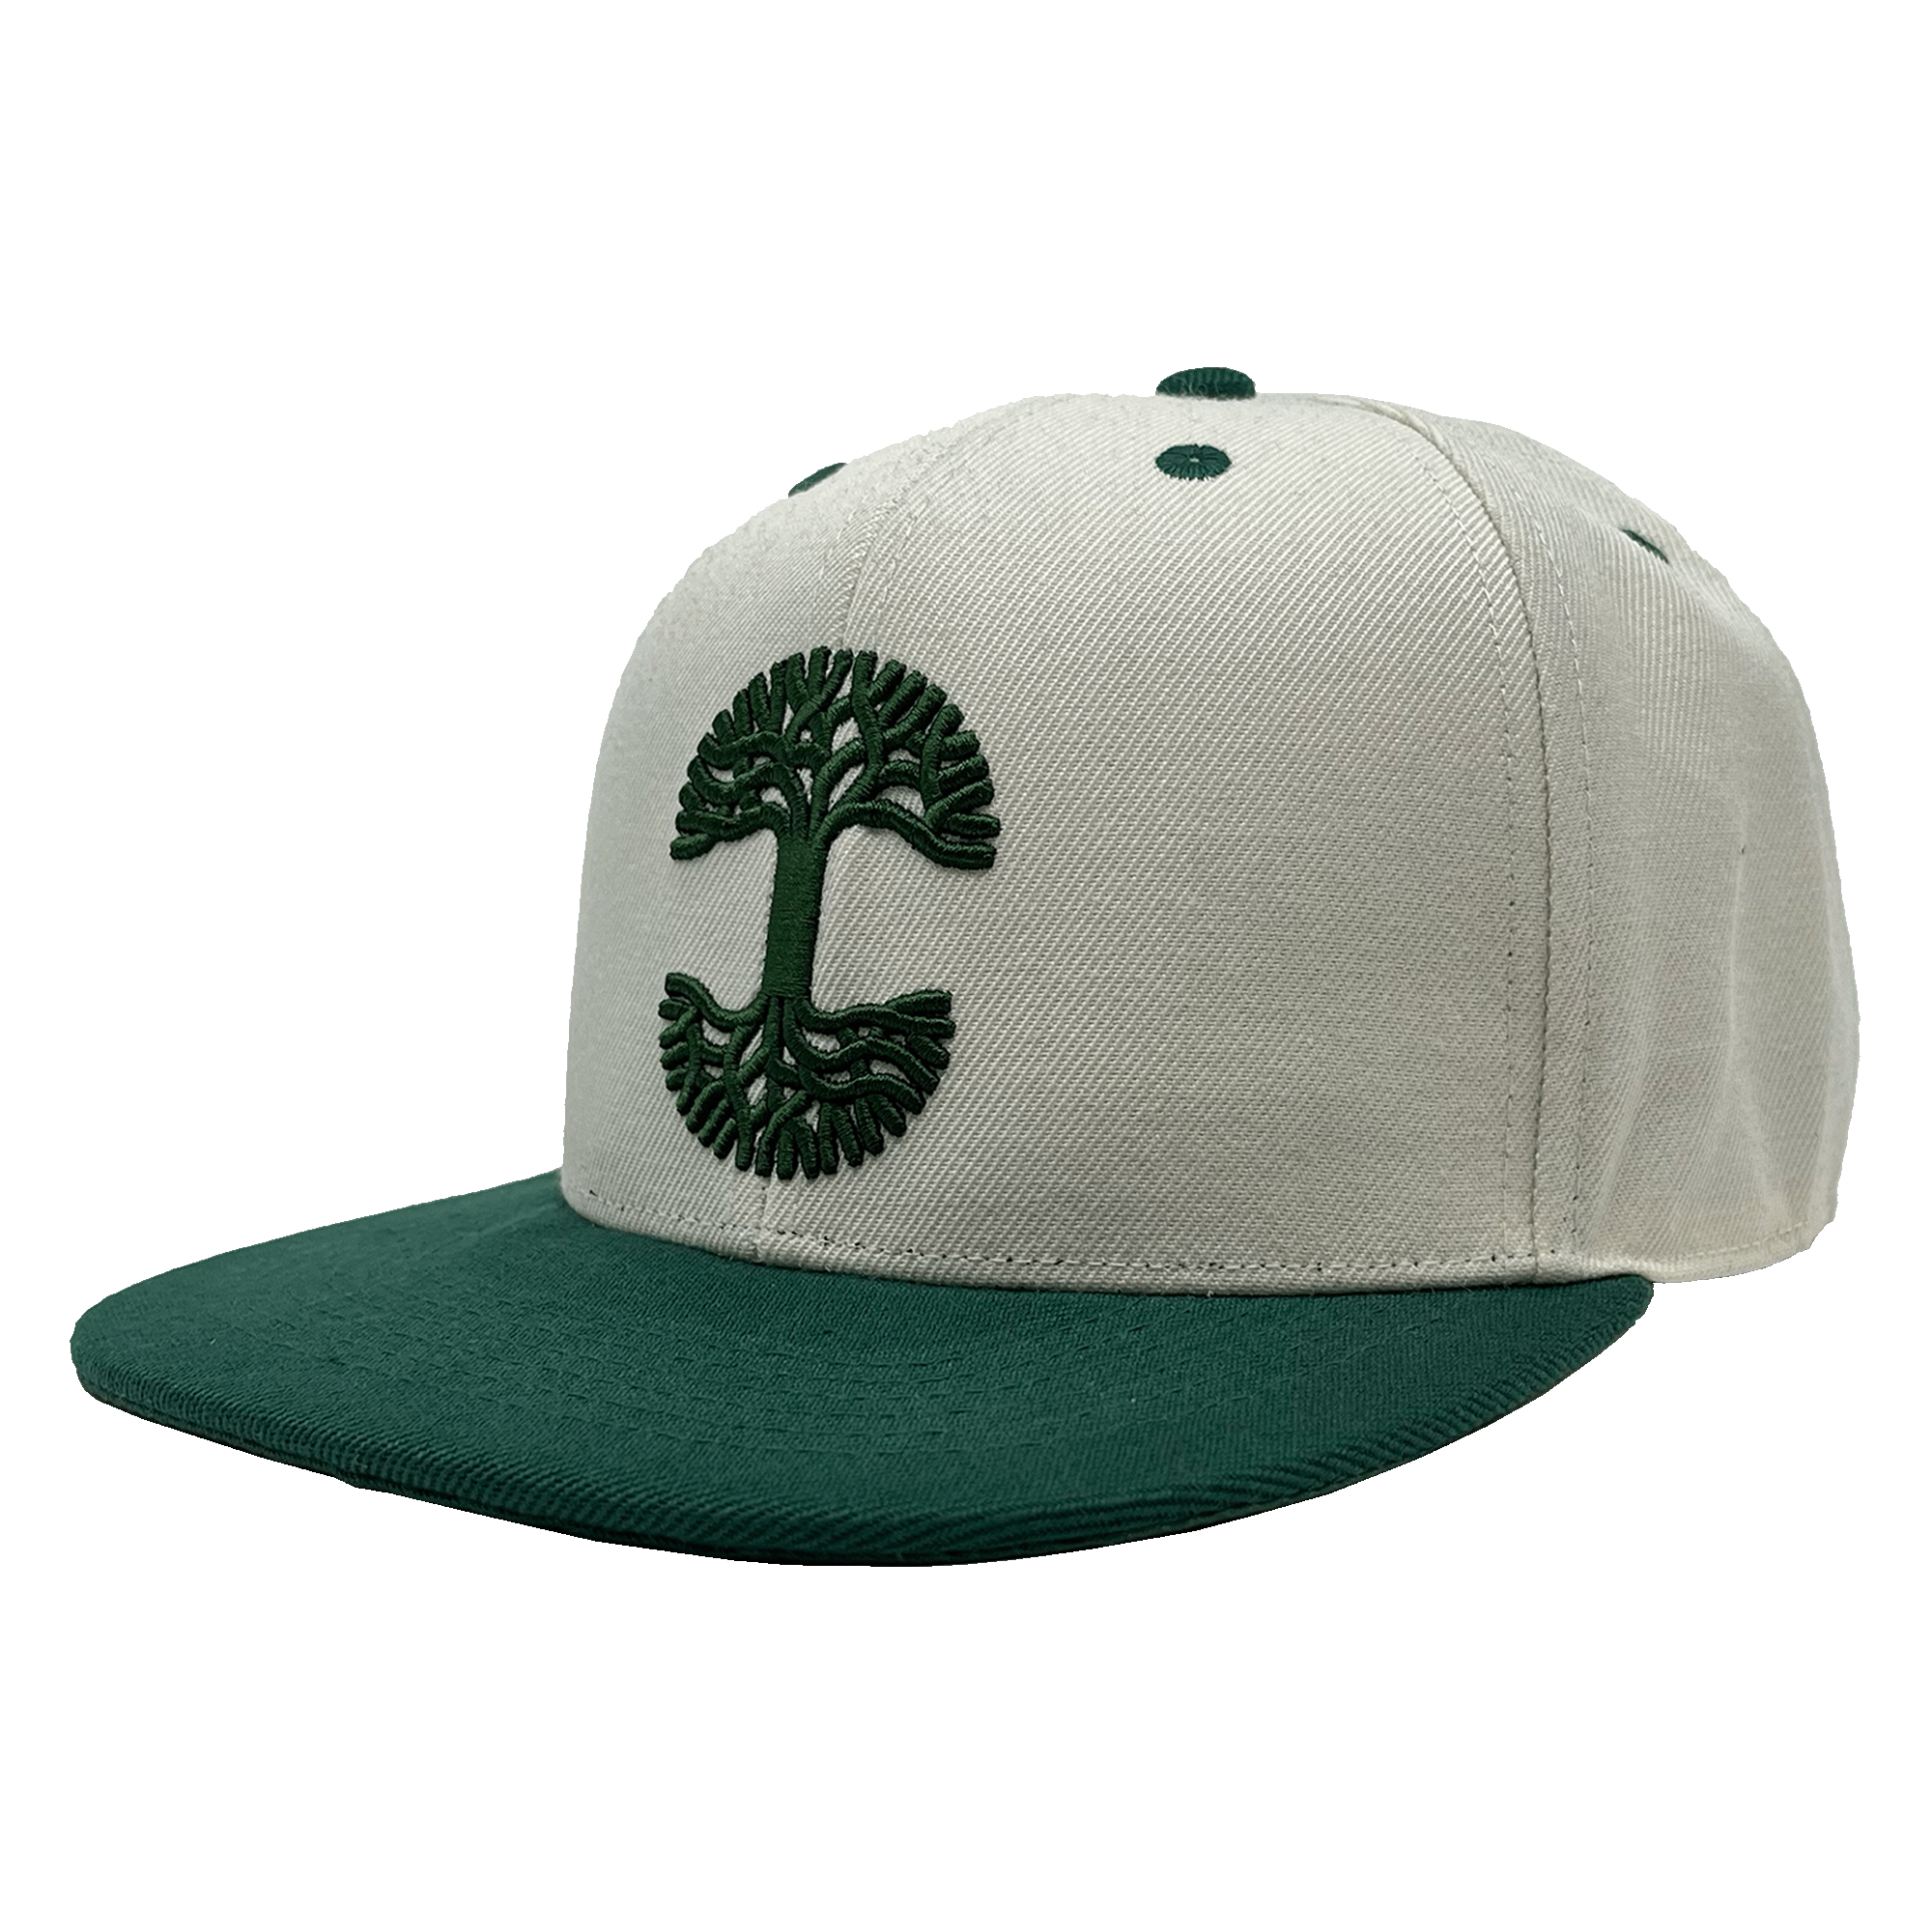 Angled side view of a white hat with green bill and green embroidered Oaklandish tree logo on the front crown.